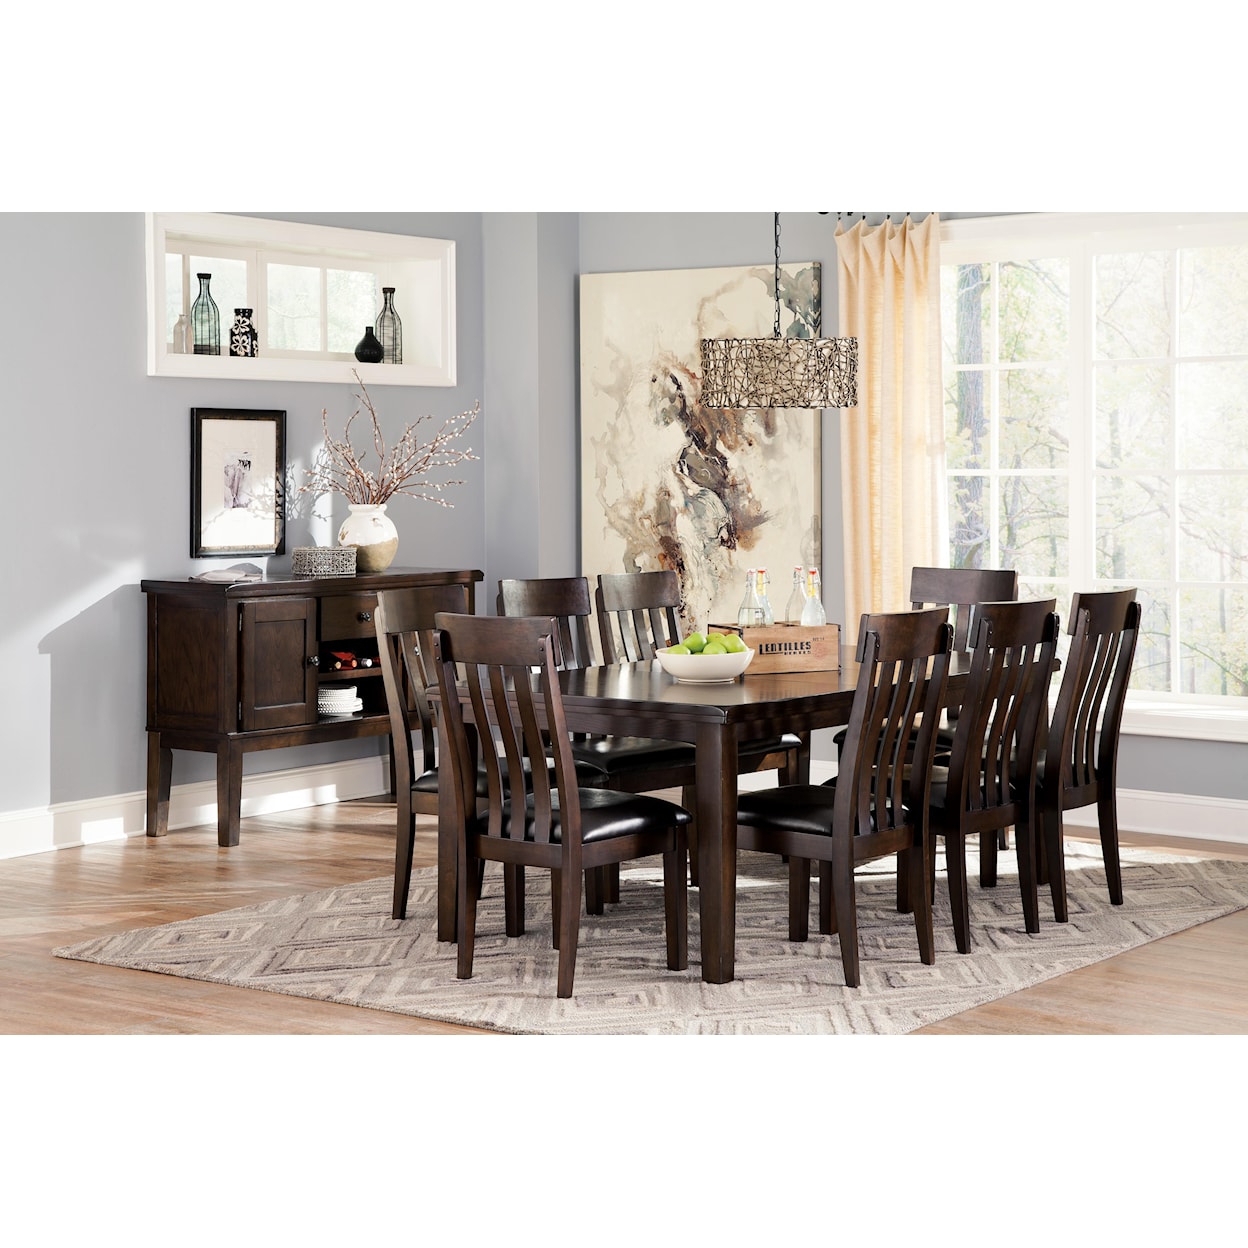 Belfort Select Haddigan 9-Piece Dining Room Table & Side Chair Set